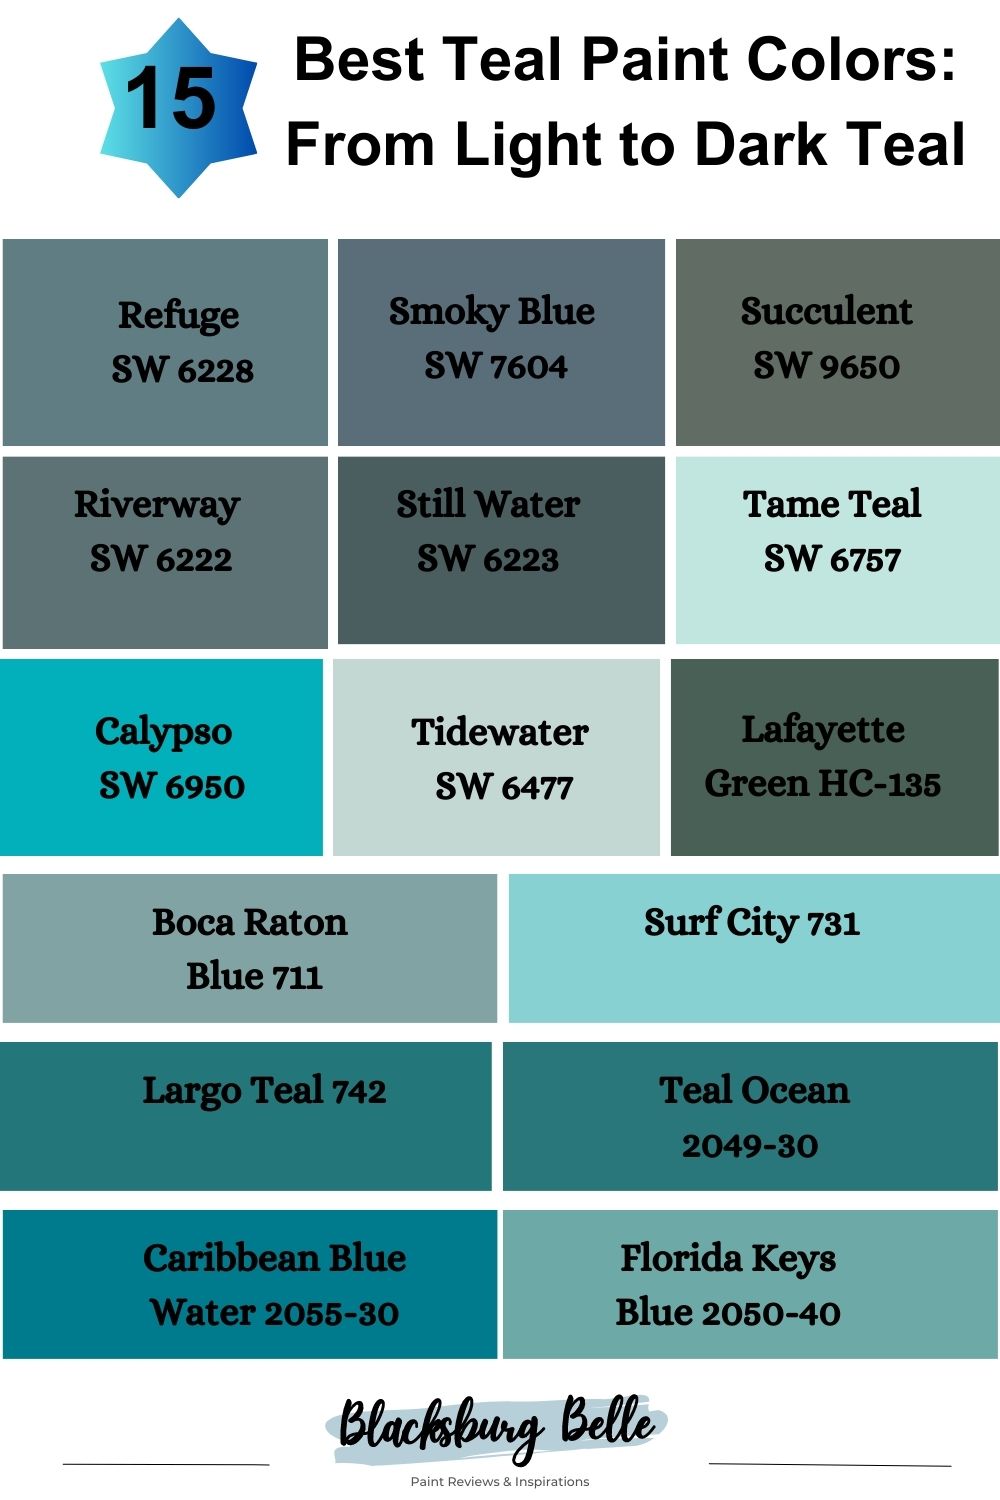 15 Best Teal Paint Colors: From Light to Dark Teal